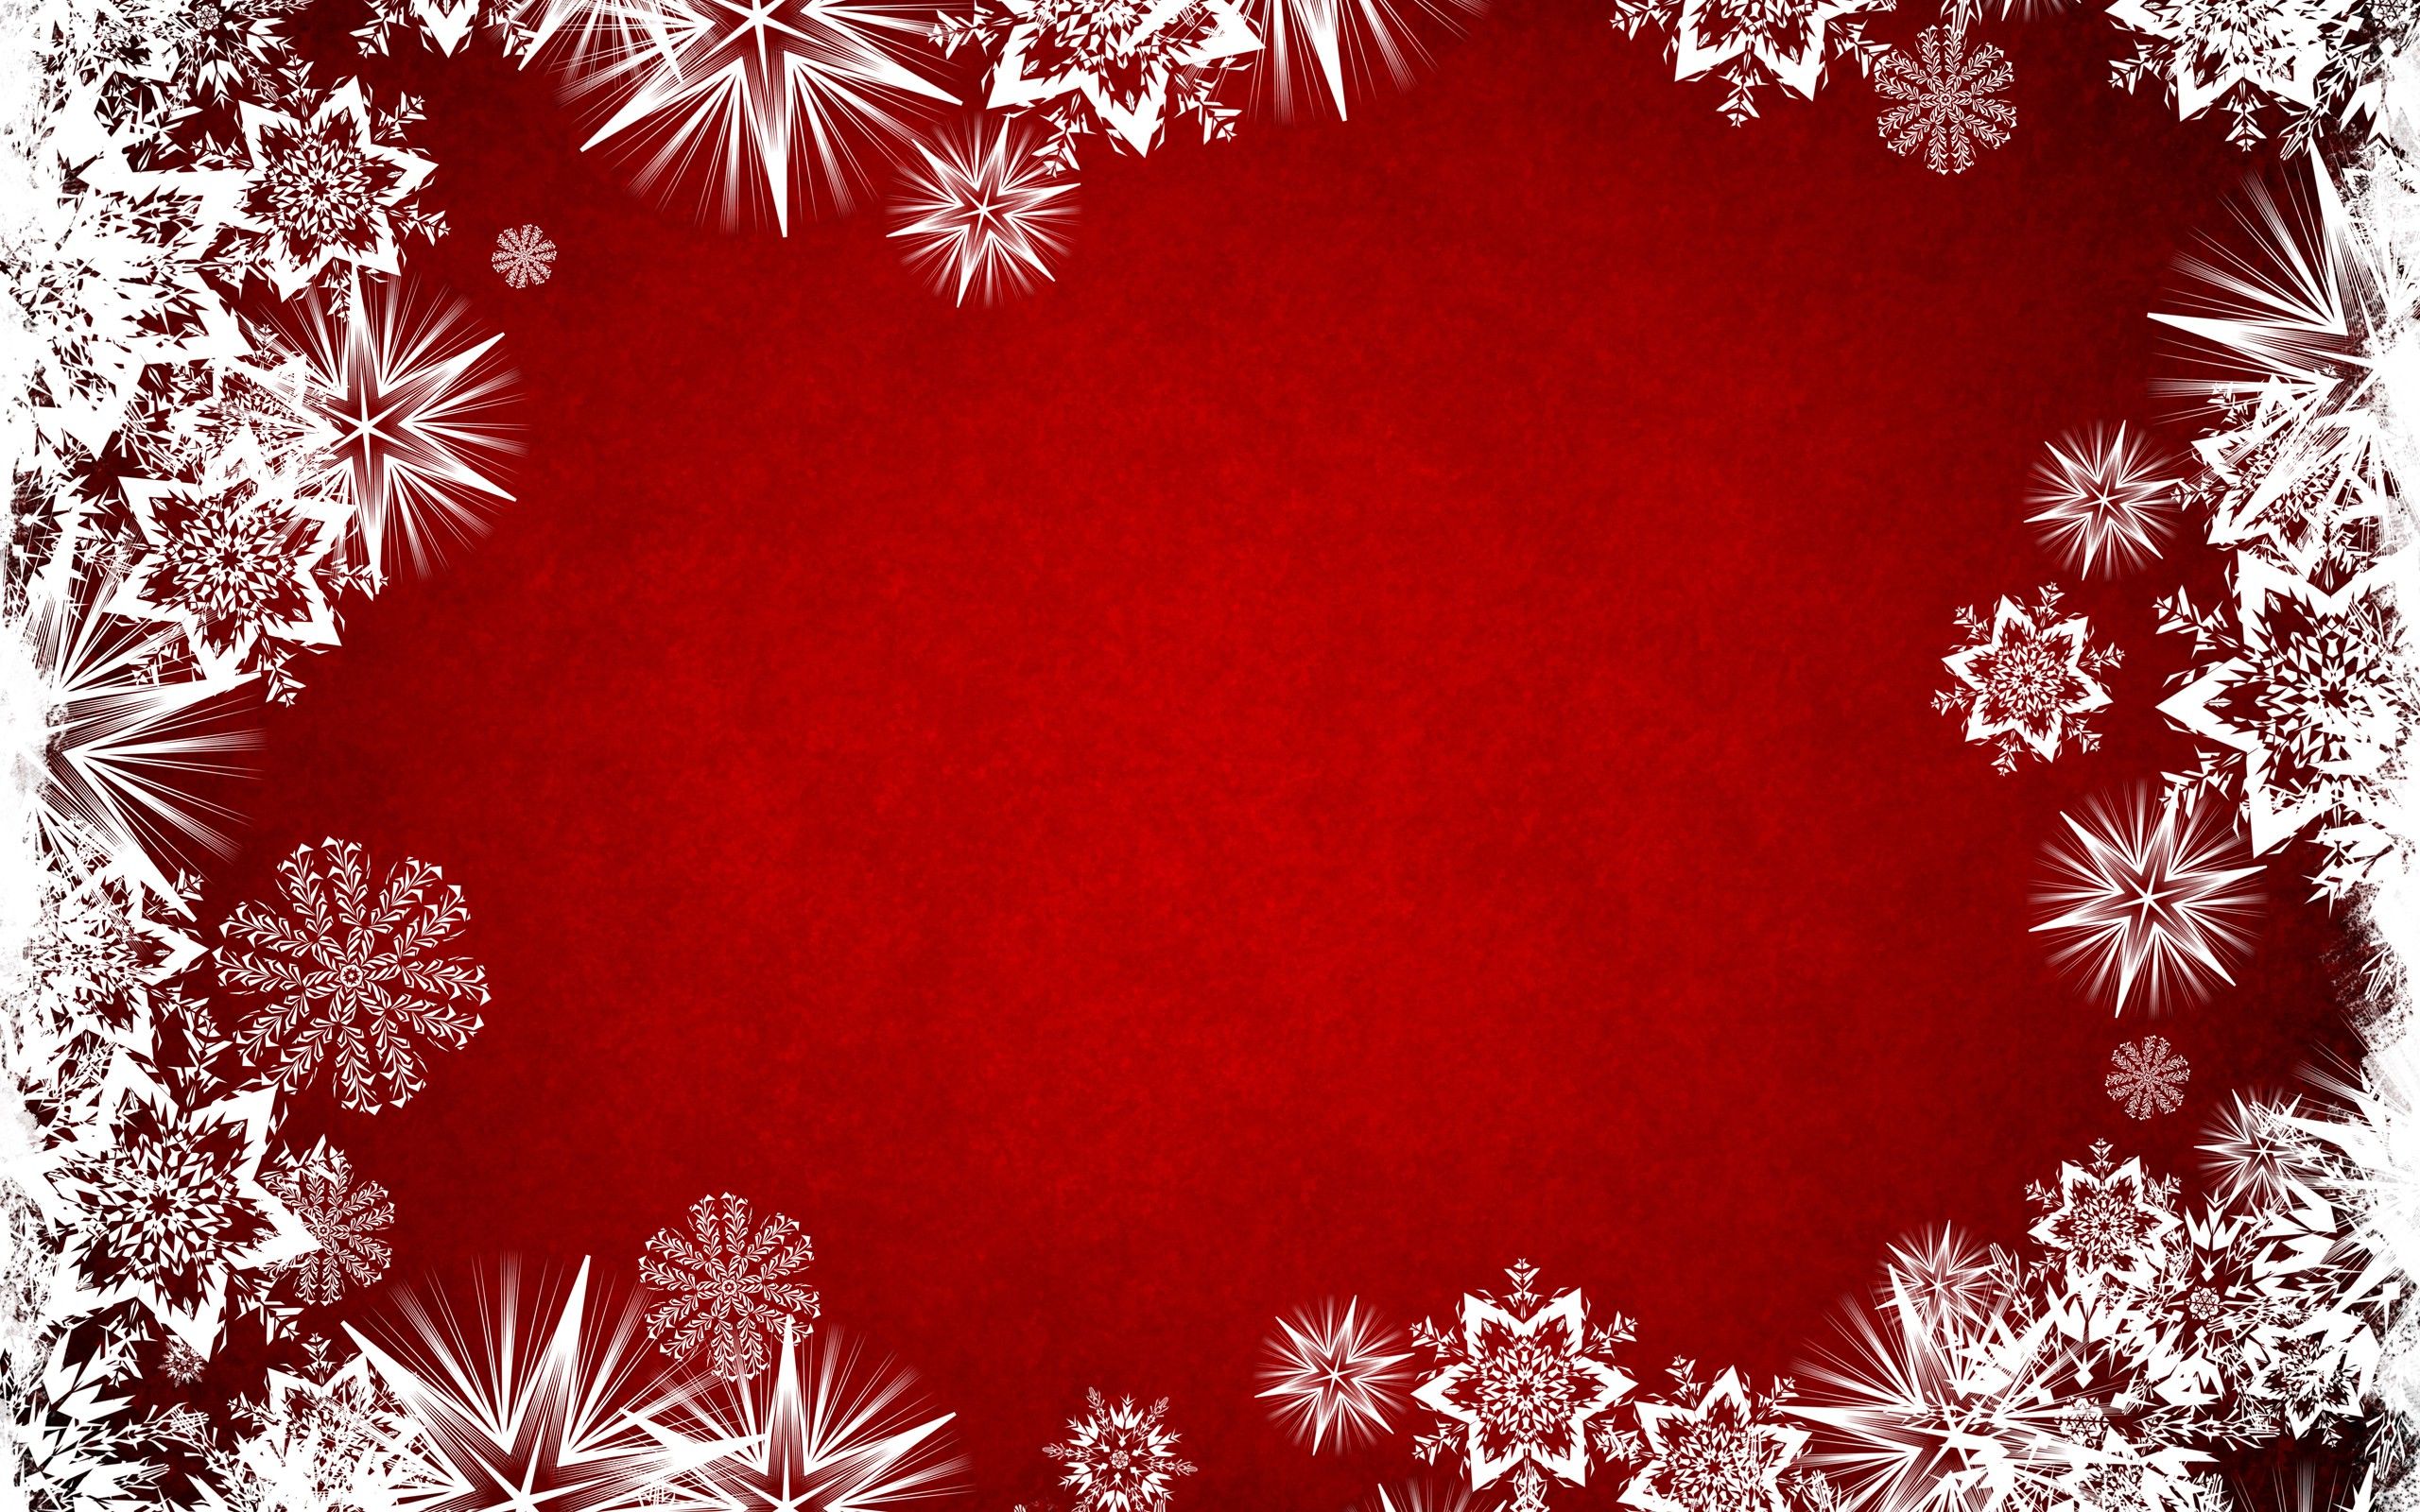 red snowflakes background